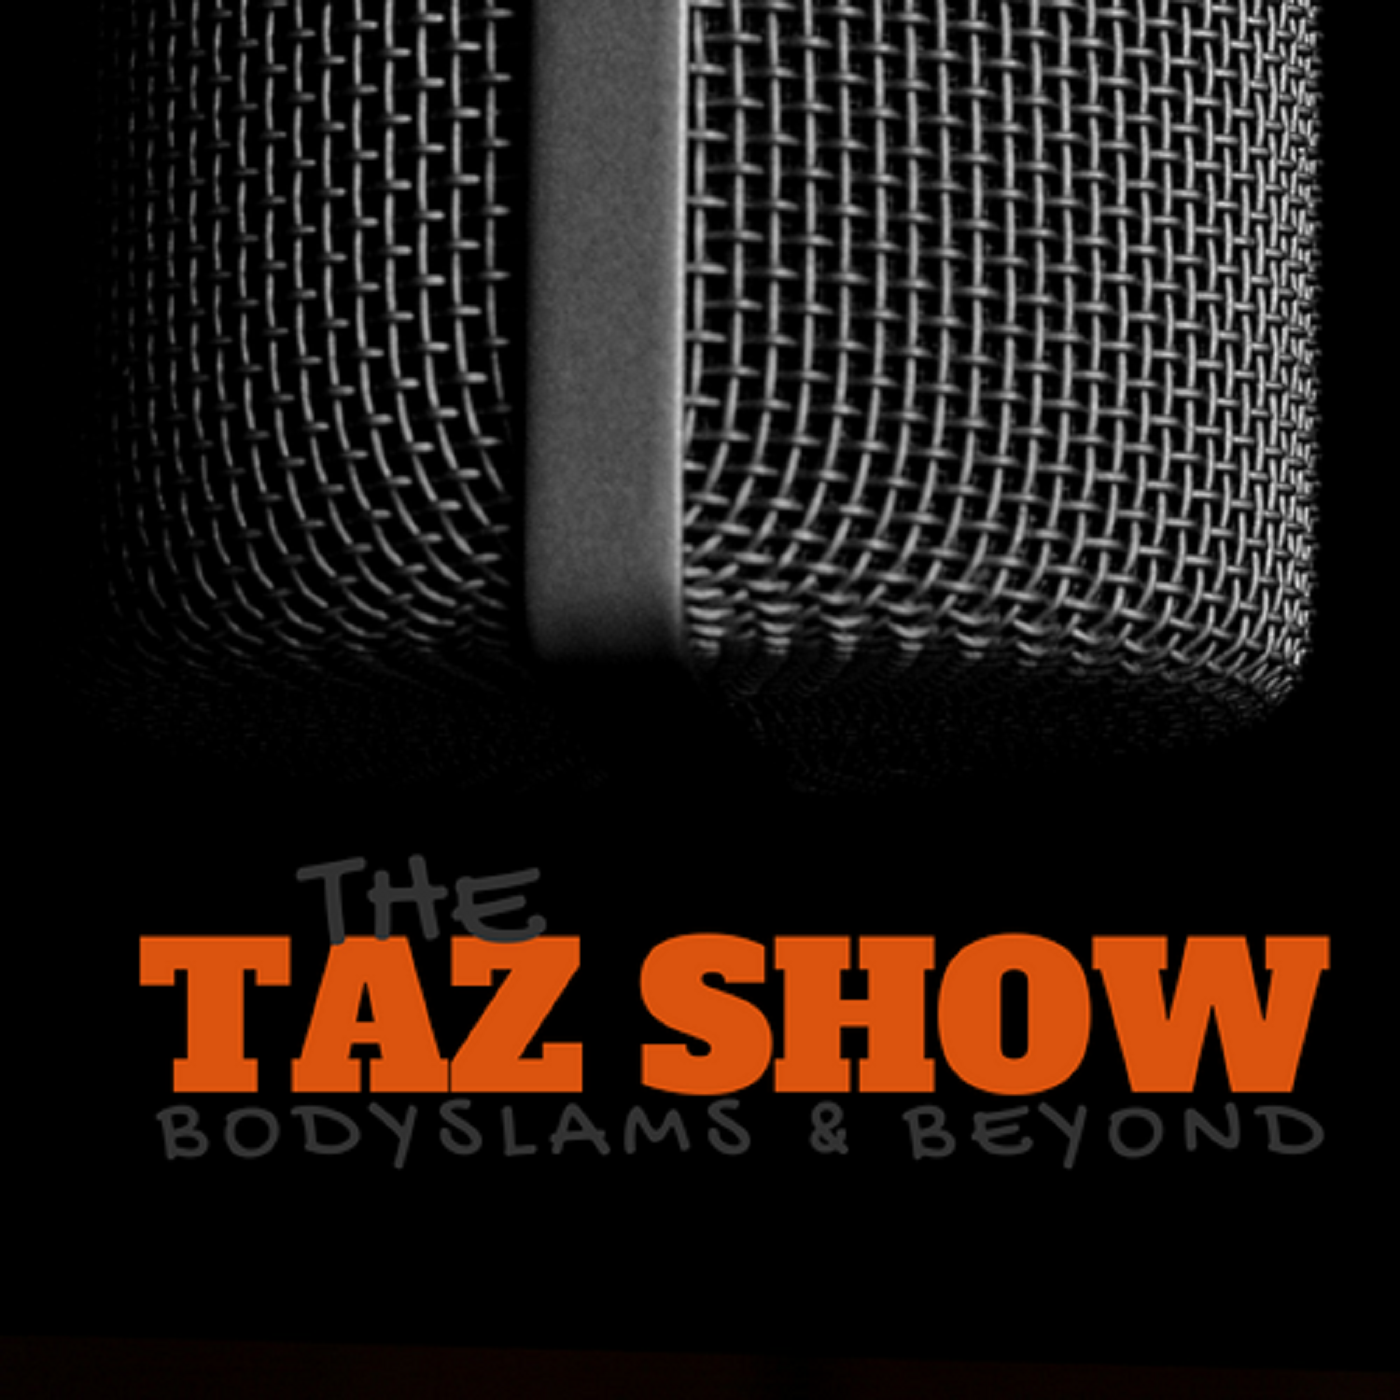 The Taz Show! Tuesday, October 6th, 2015